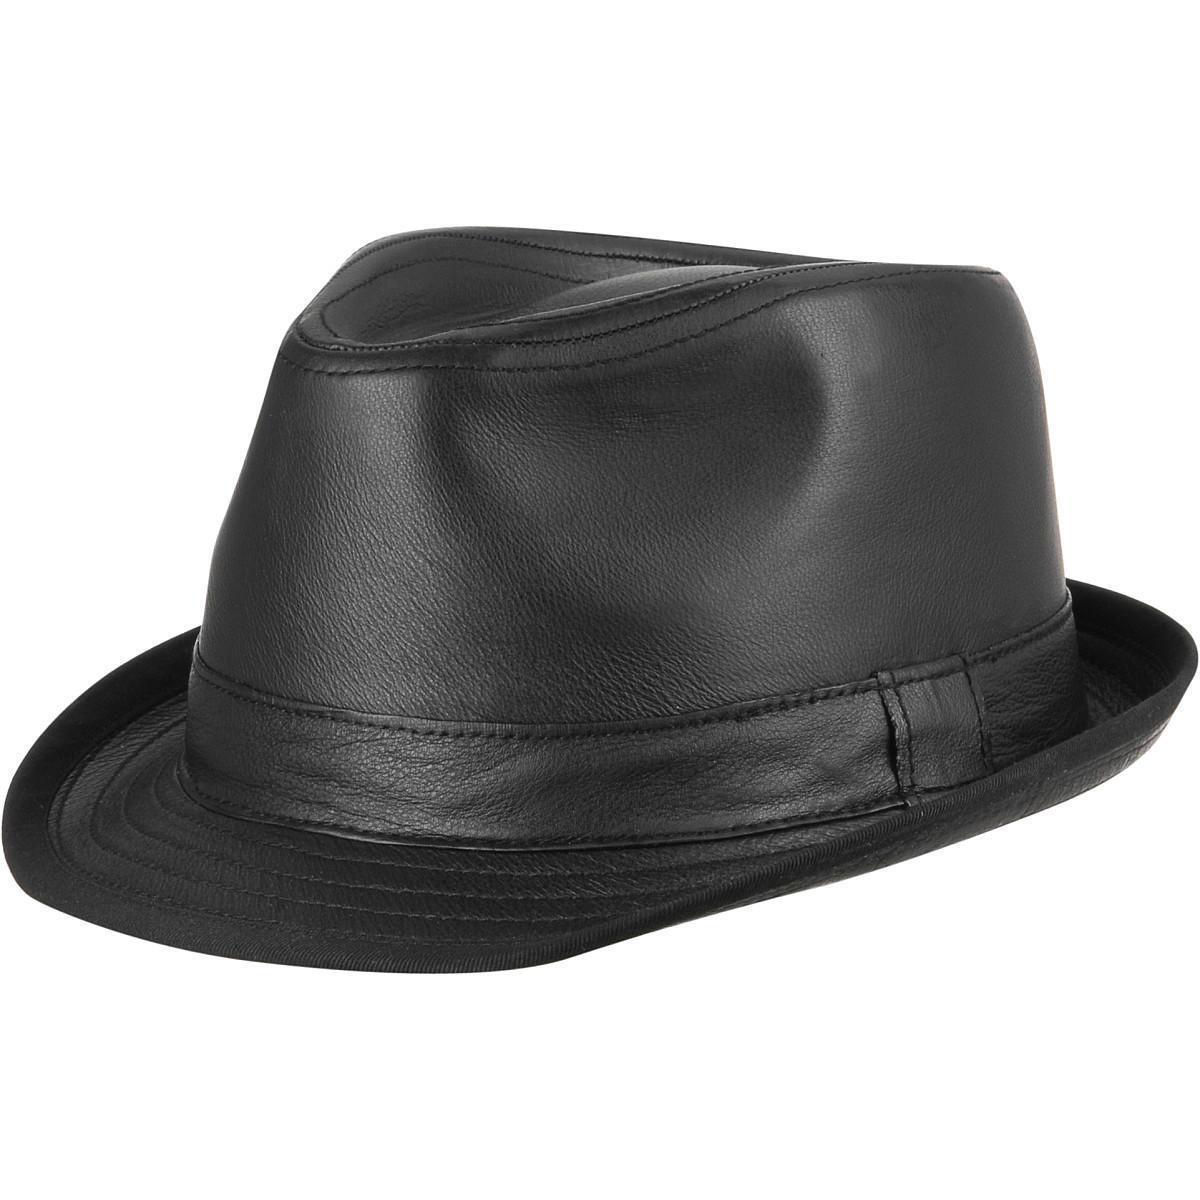 Wilsons Leather Fedora Leather Hat in Black for Men - Lyst